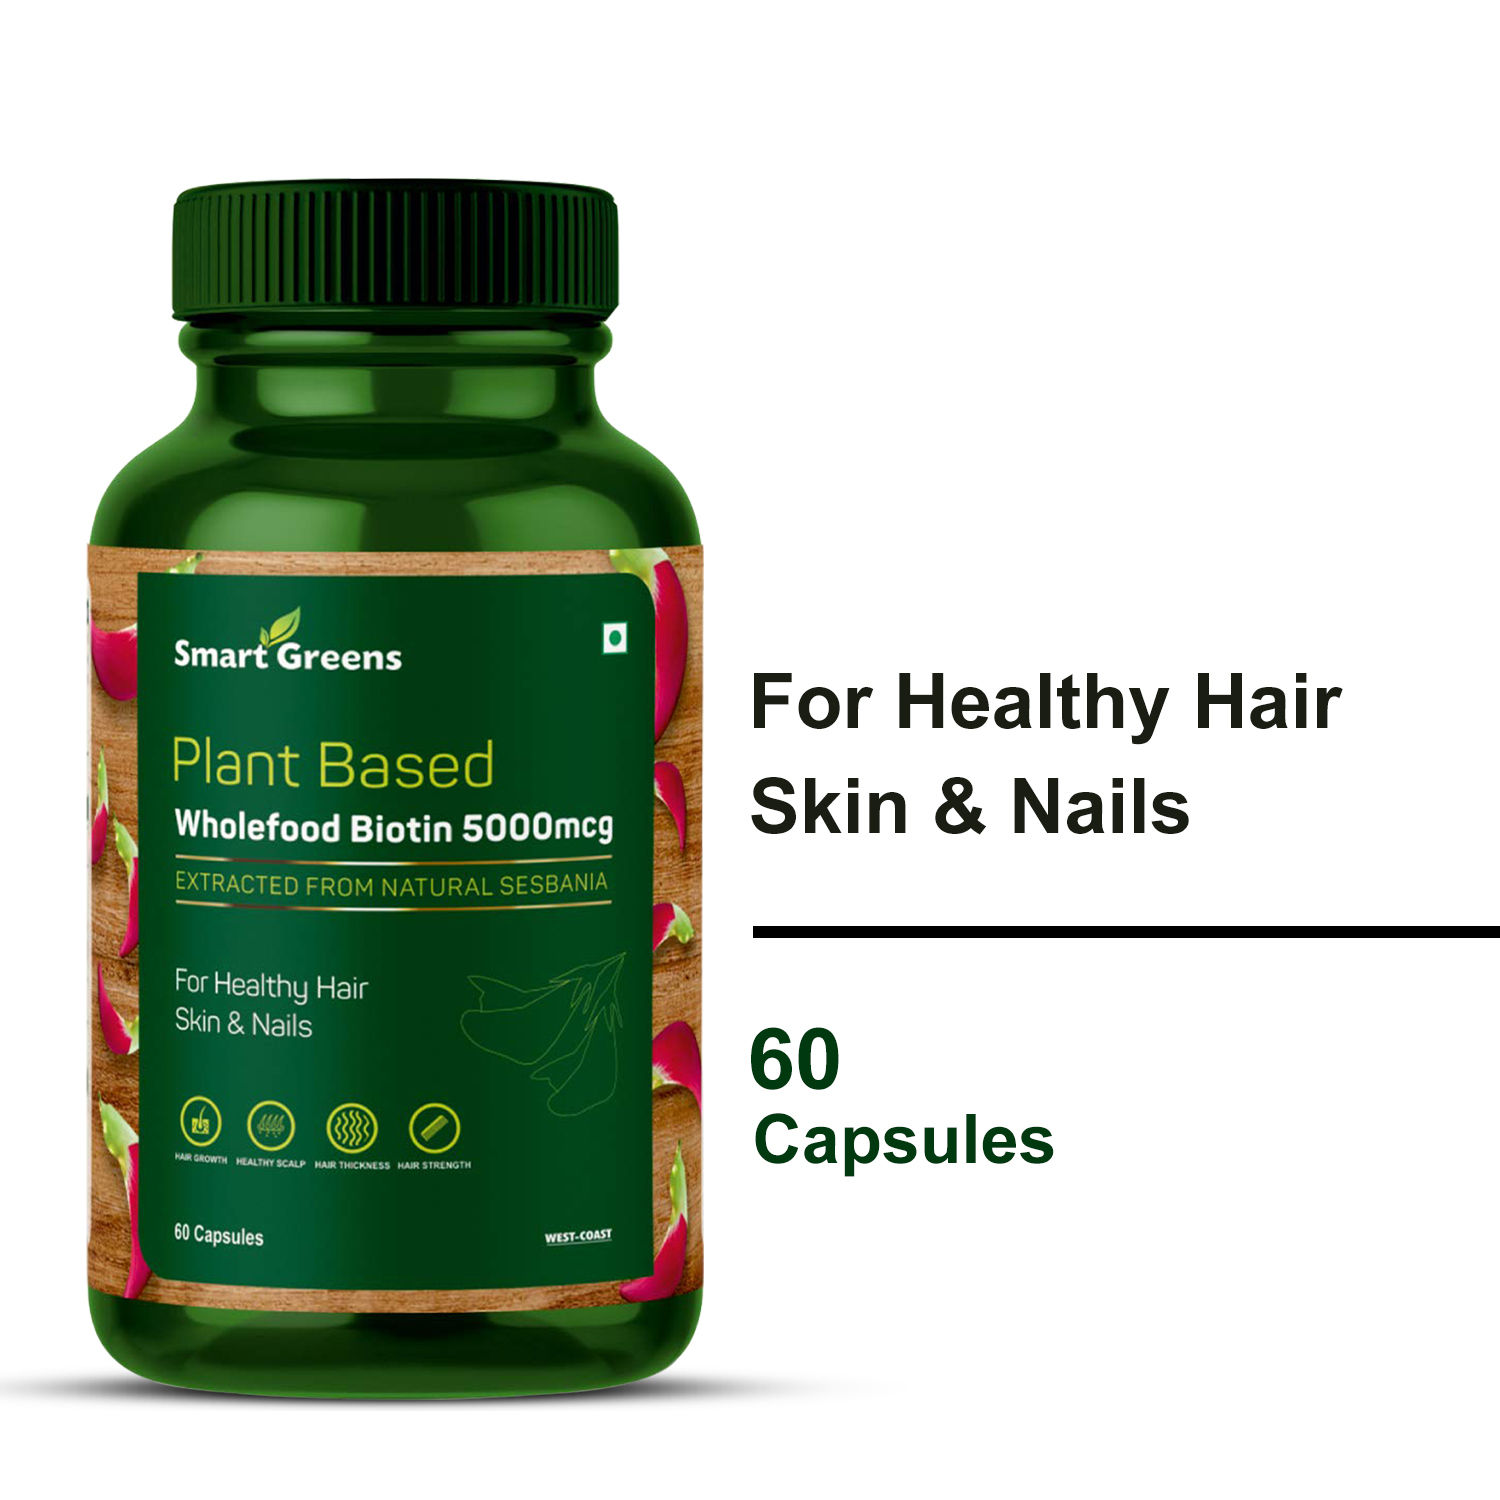 Biotin for Hair Growth - Does Biotin Really Work to Prevent Hair Loss